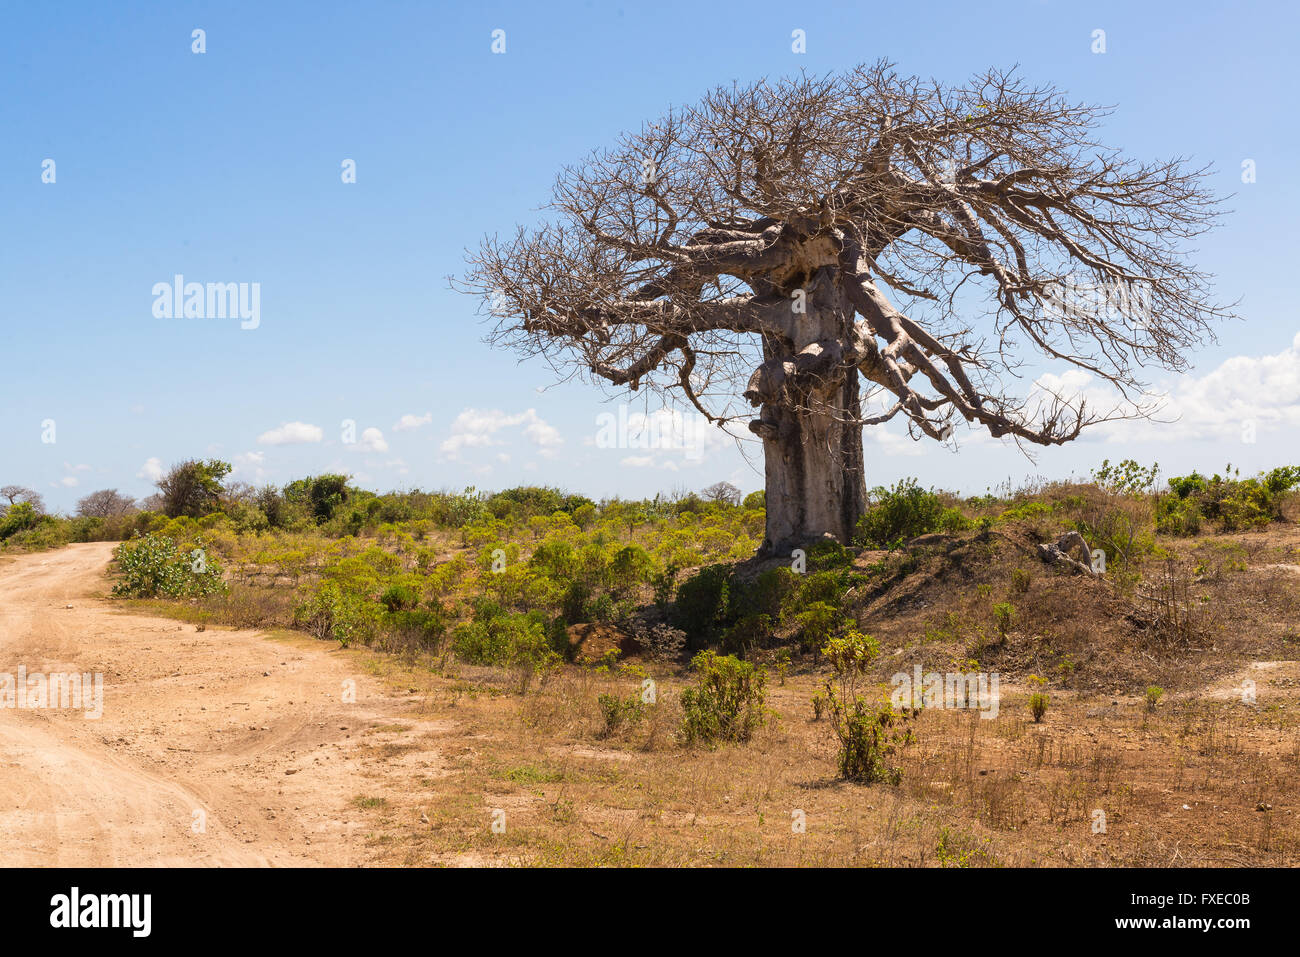 Big baobab tree surrounded by African Savannah with dirt track next to it Stock Photo